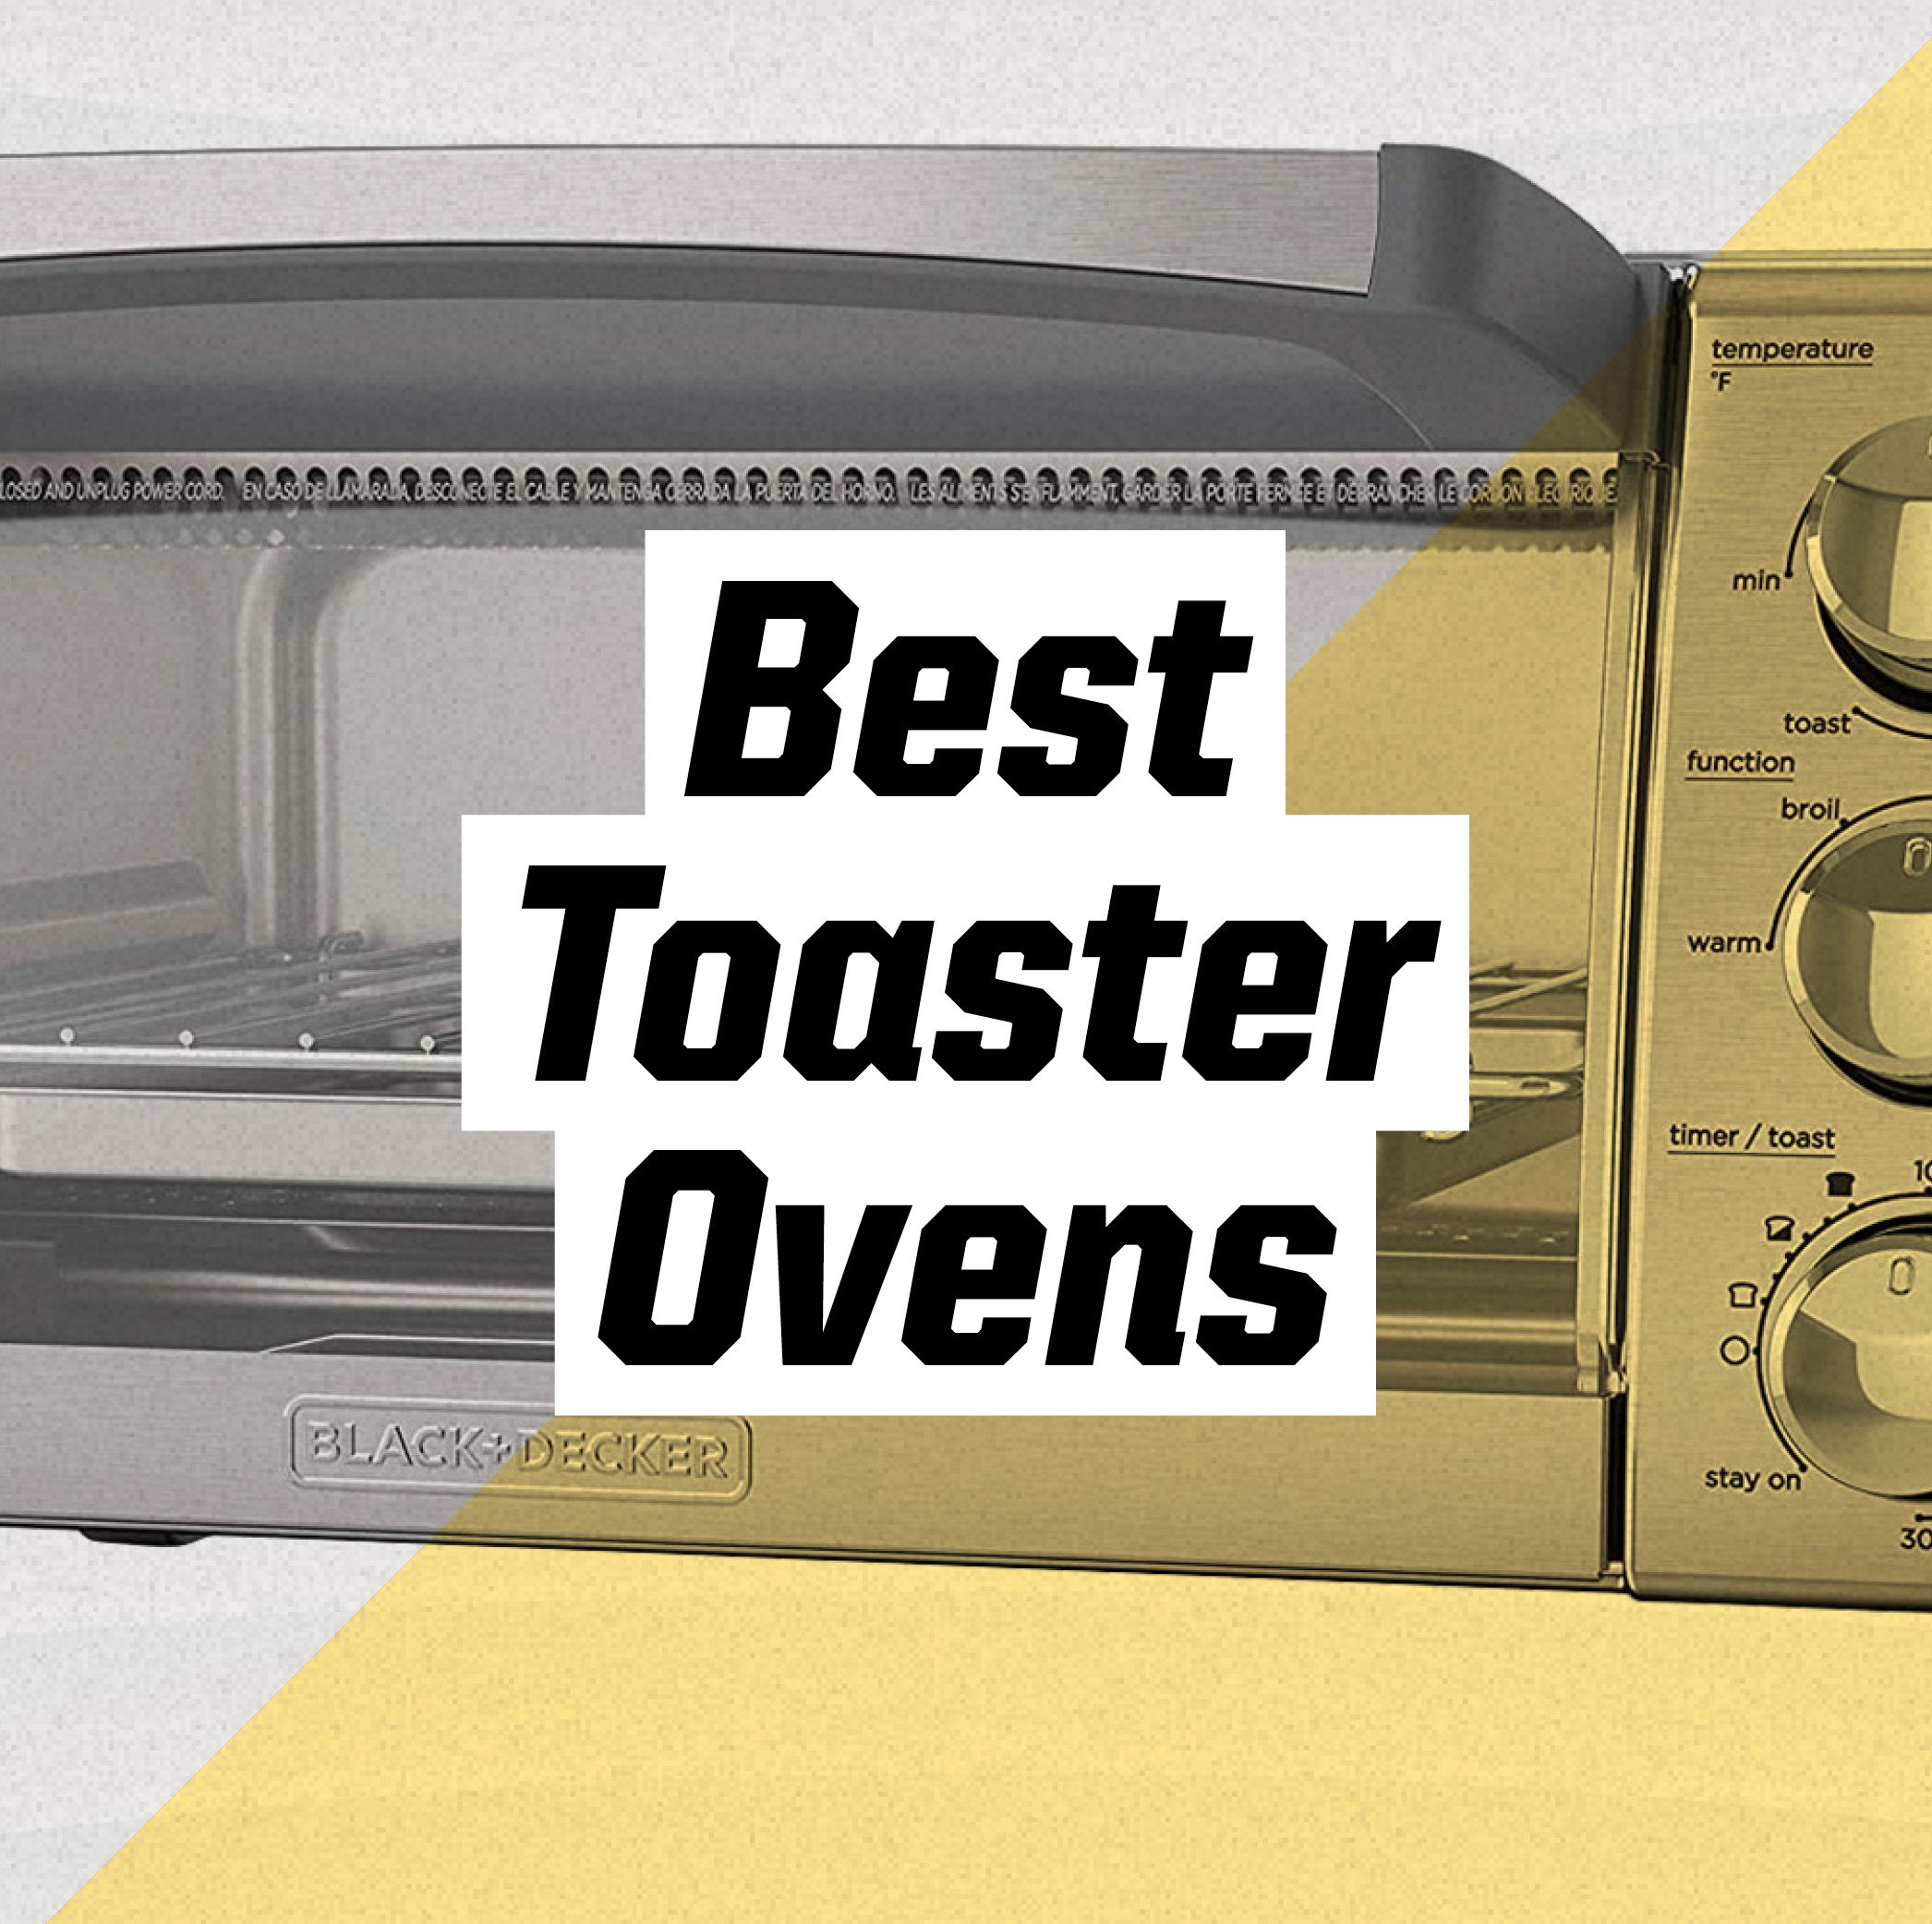 The Best Toaster Ovens Do More